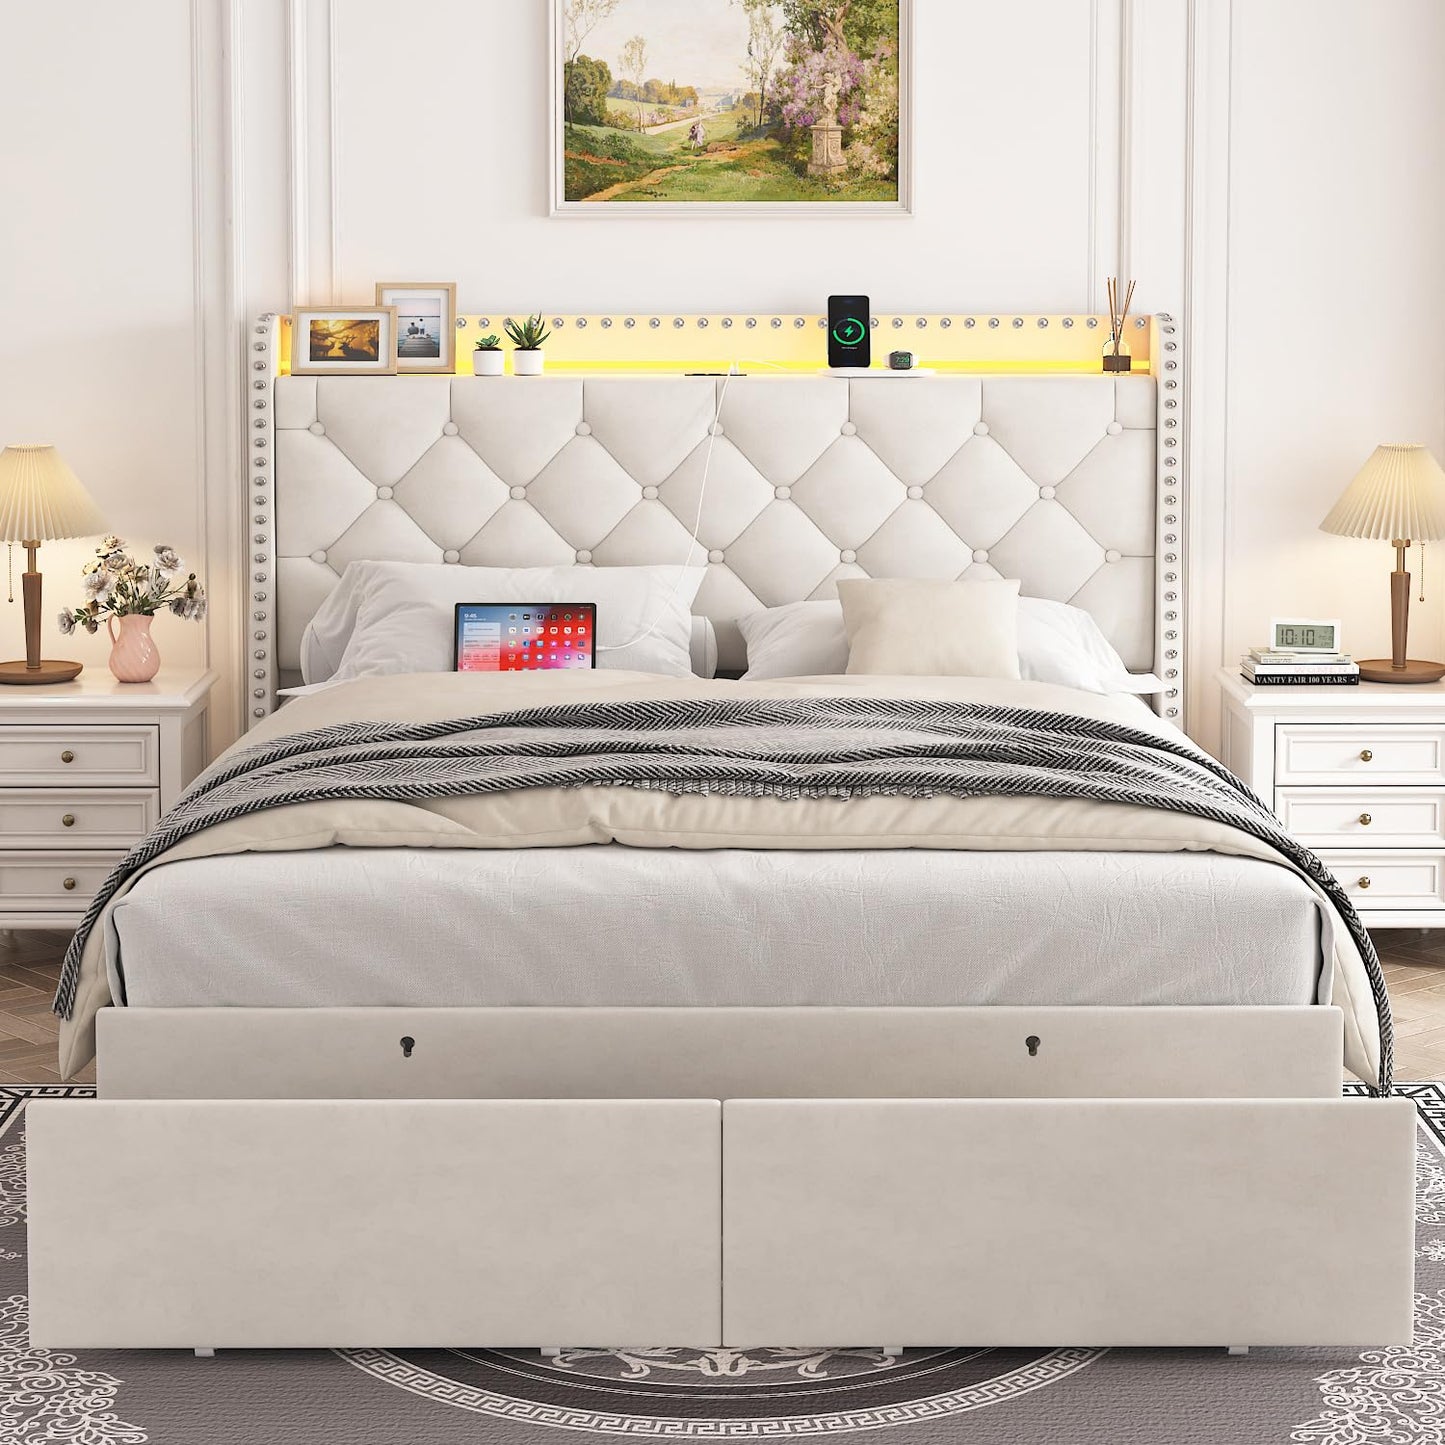 TIGUBFRE Queen Size Bed Frame with Storage Drawers, Upholstered Bed Frame with Wingback Diamond Tufted Headboard, LED Lights, Wood Slats Support, Easy Assembly, No Box Spring Needed, Beige